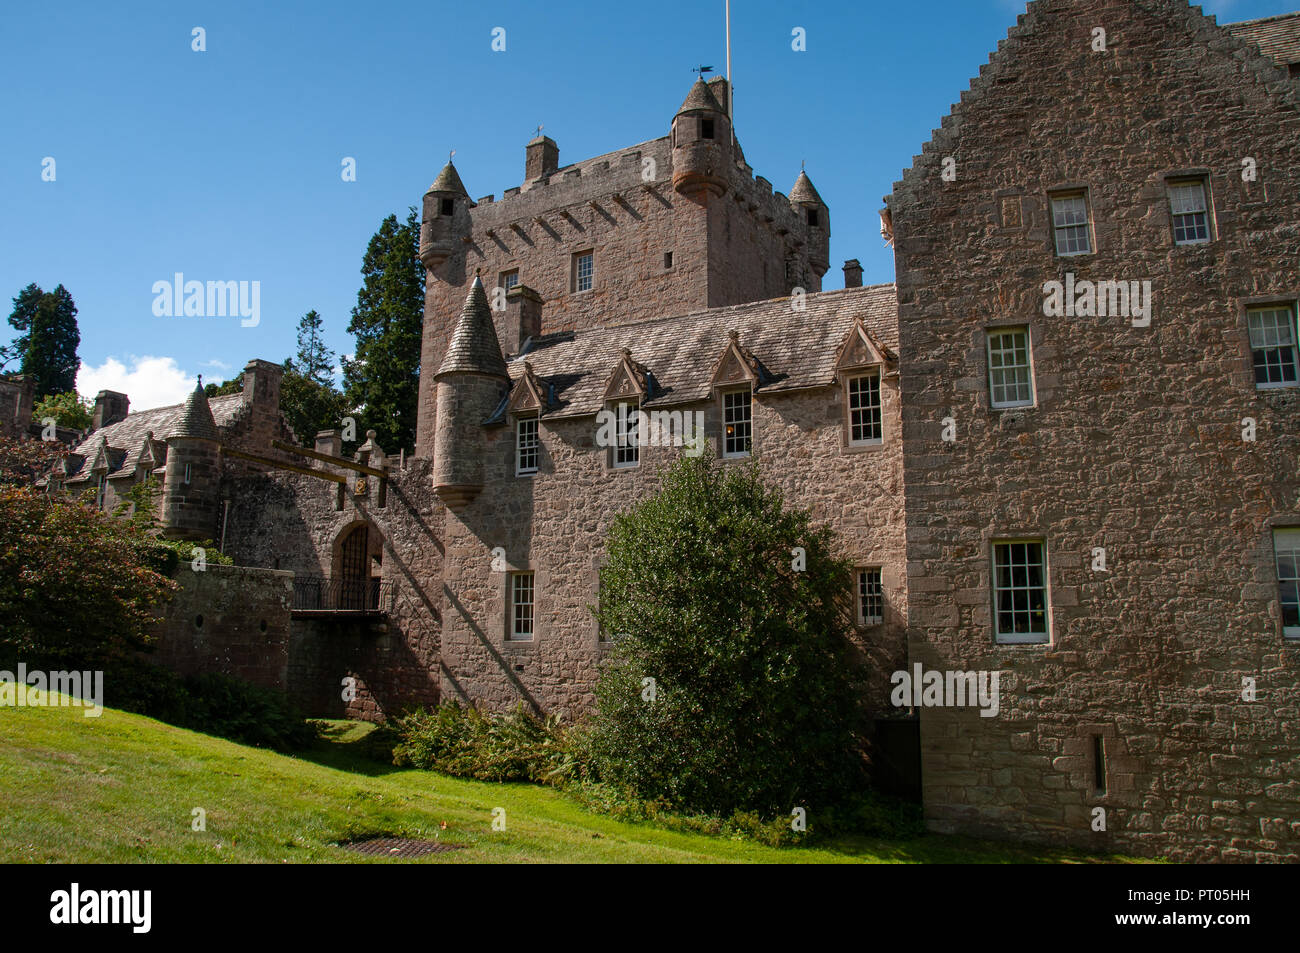 Cawdor Castle near Inverness, Scotland, home to the Thane of Cawdor made famous in Shakespeare's play Macbeth Stock Photo